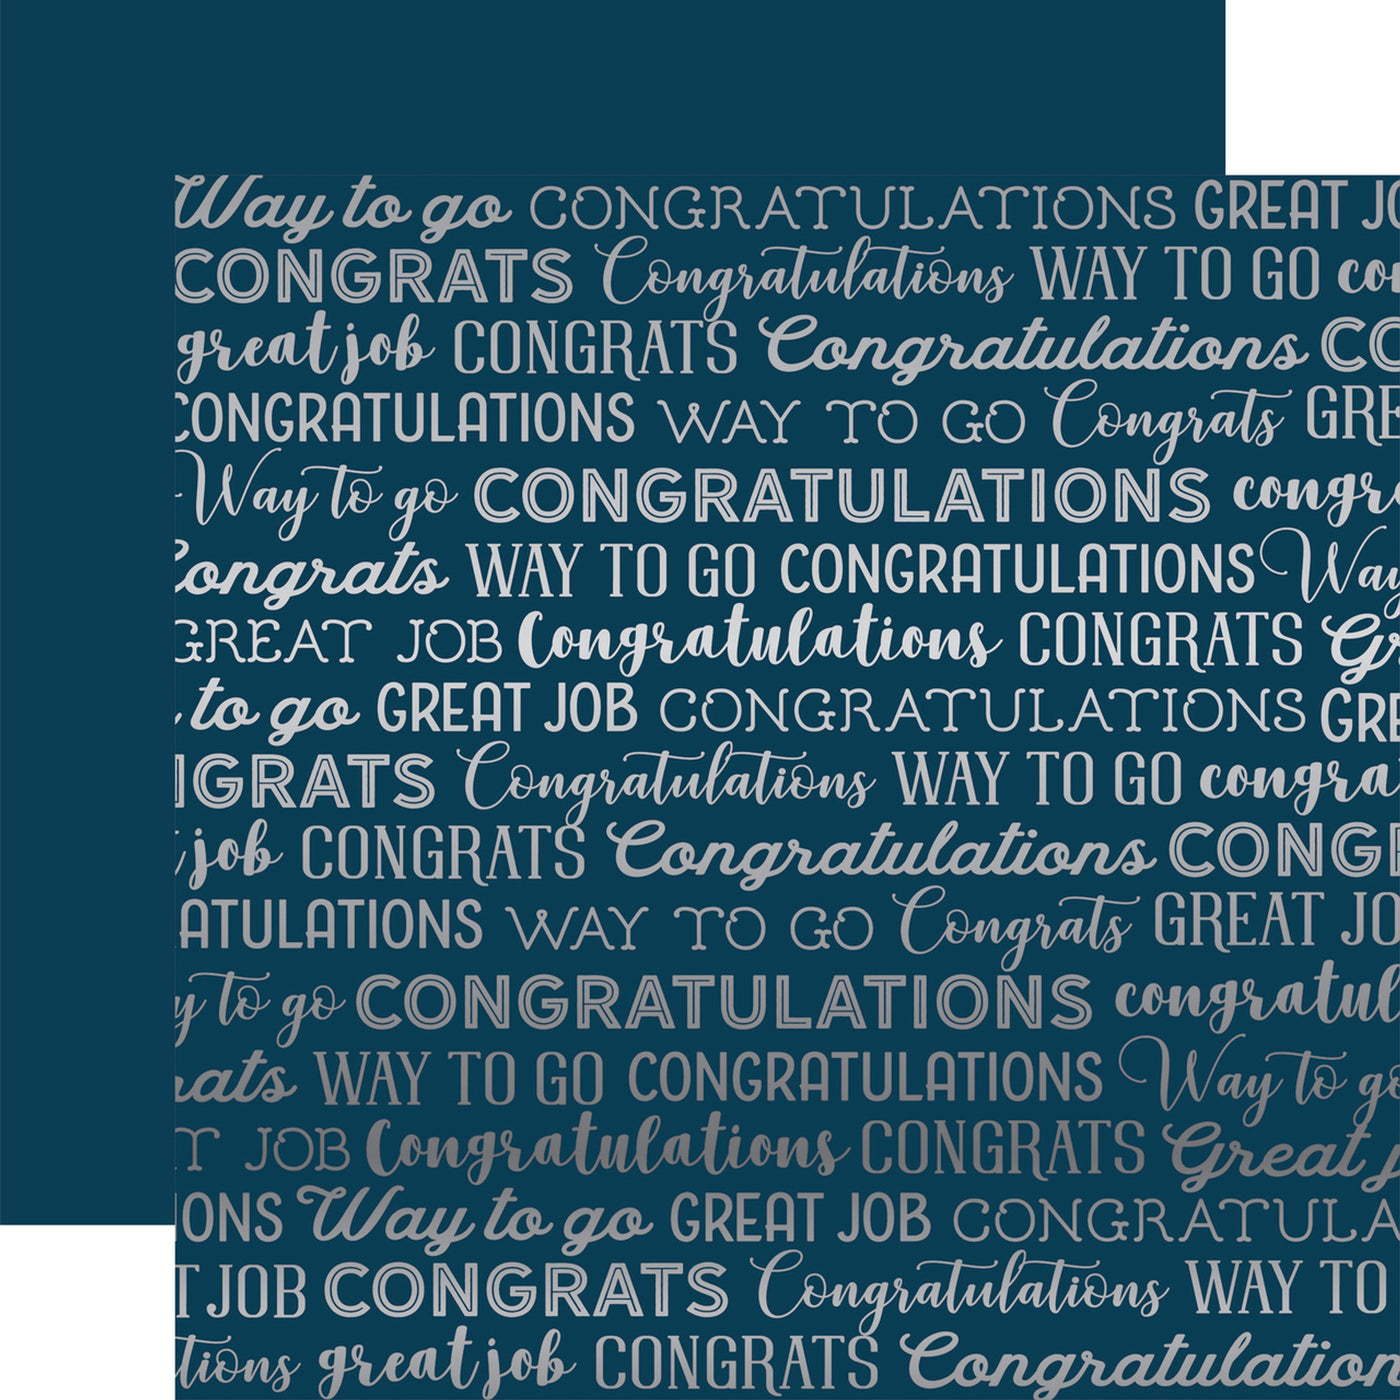 SILVER FOIL NAVY CONGRATULATIONS 12x12 Cardstock by Carta Bella Paper - 12x12 cardstock with silver foil congratulations words pattern from Carta Bella Paper Co. Great enhancement for paper crafting, archival-safe and acid-free.